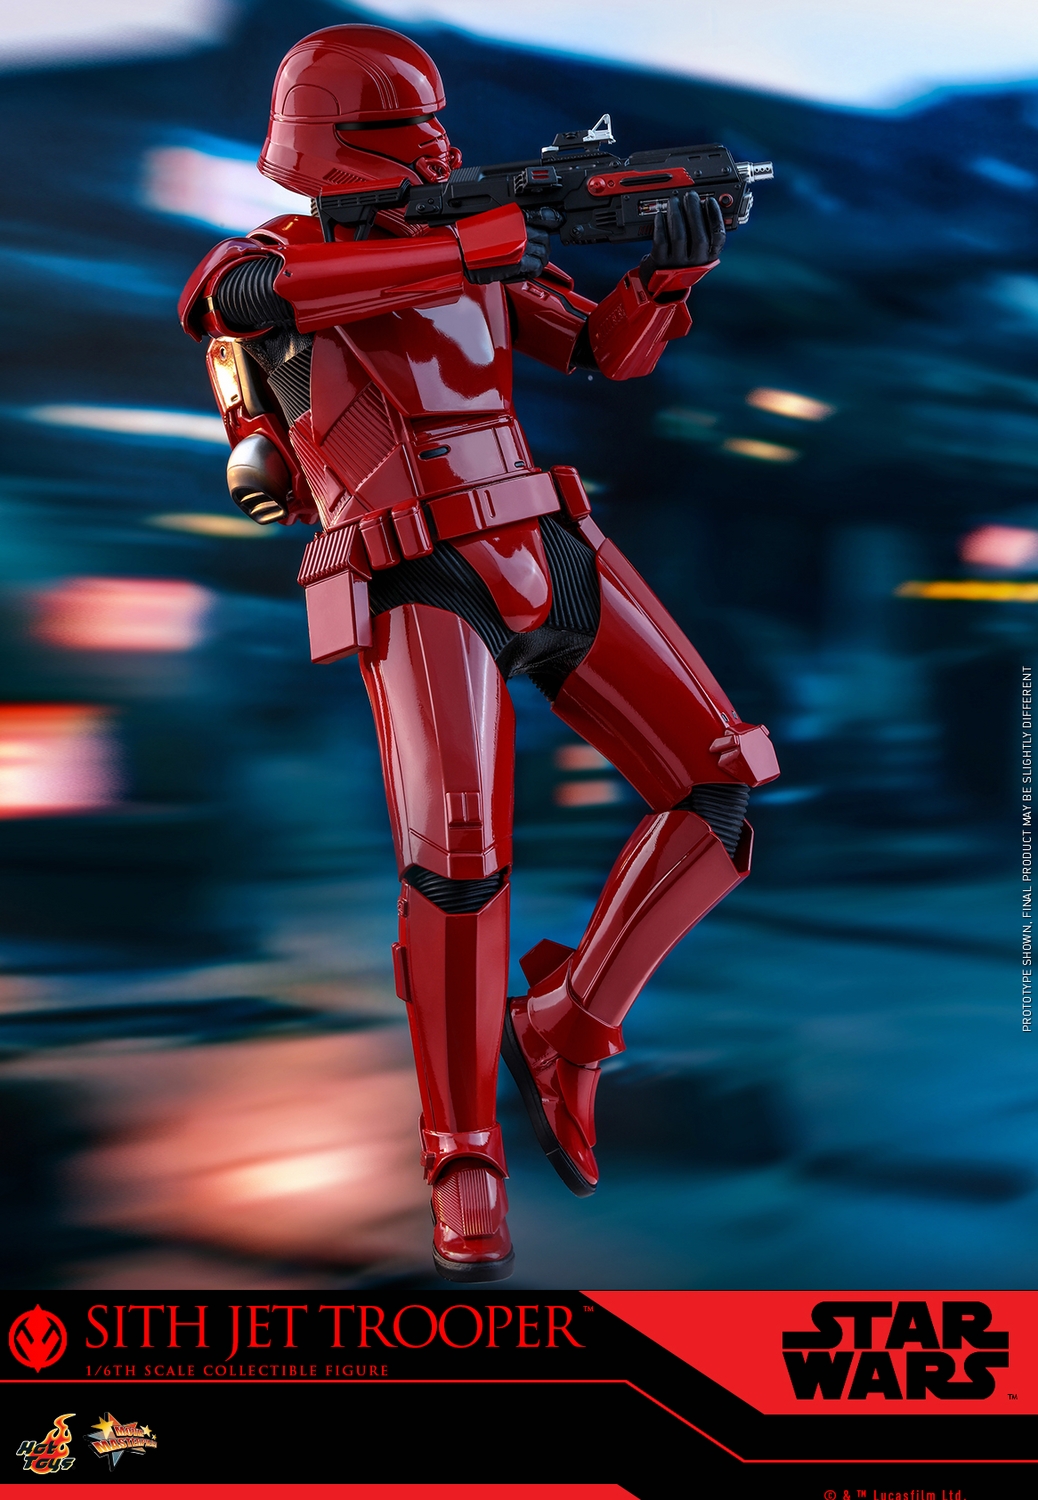 hot-toys-sith-jet-trooper-collectible-figure-121219-009.jpg